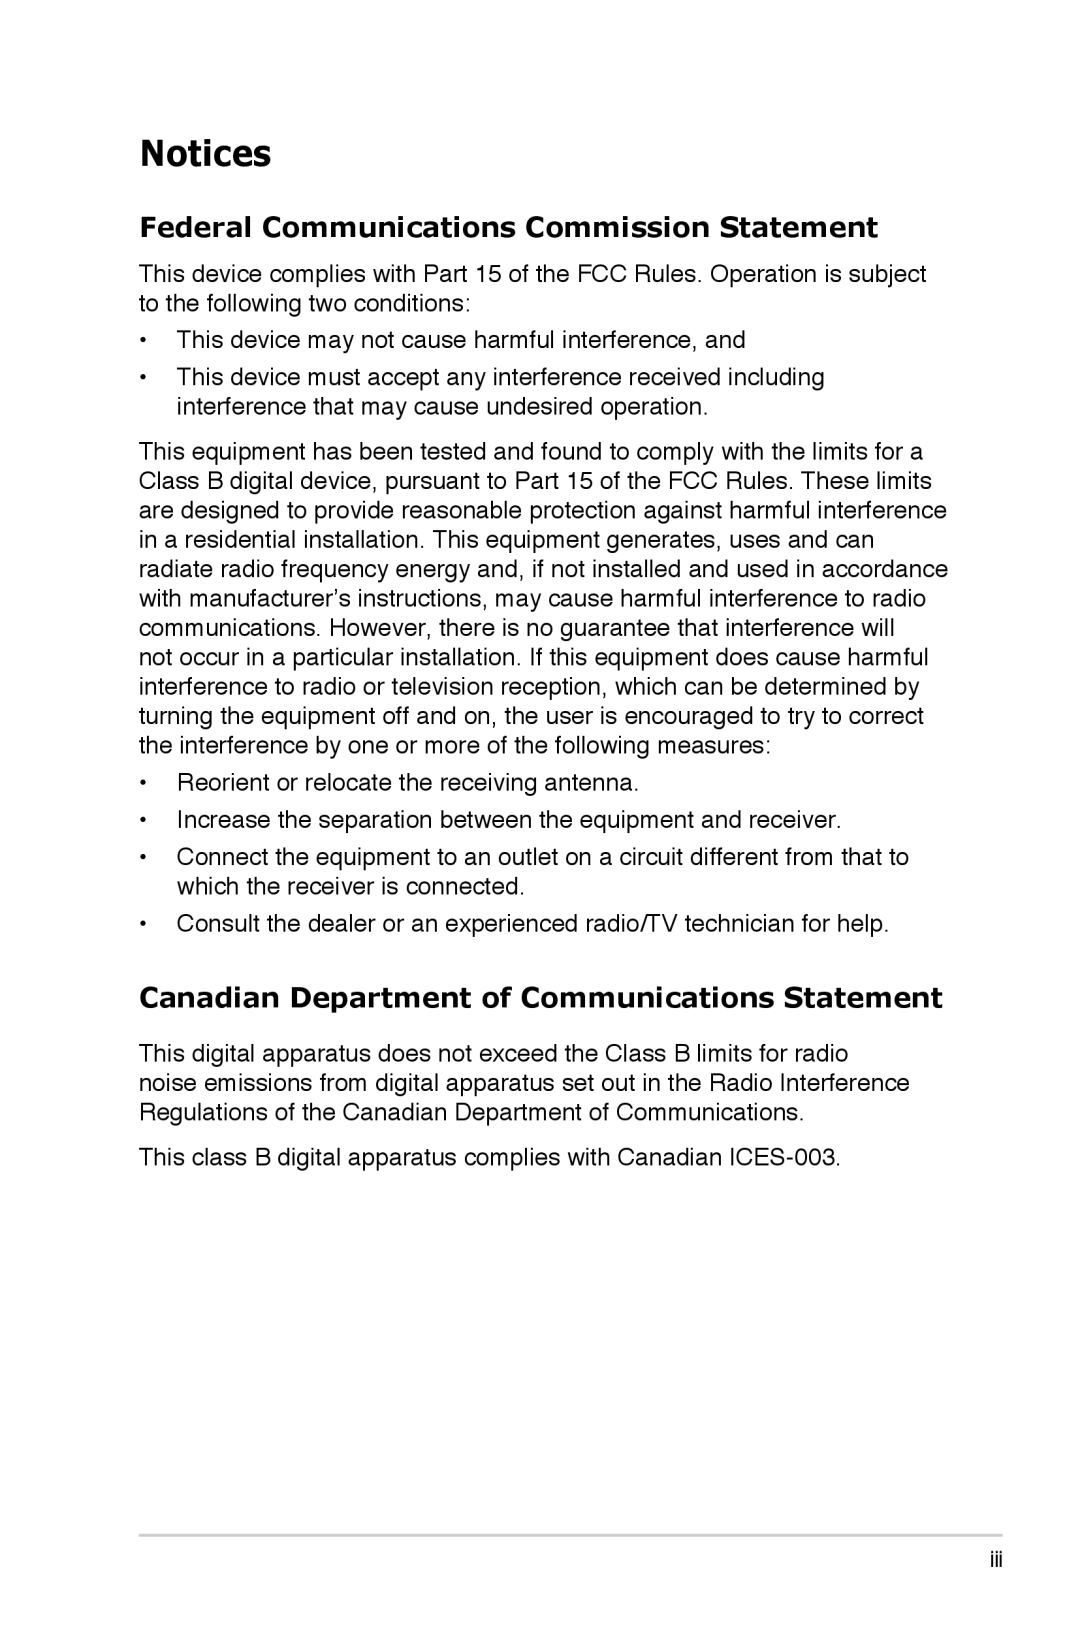 Asus VB199 Series Notices, Federal Communications Commission Statement, Canadian Department of Communications Statement 